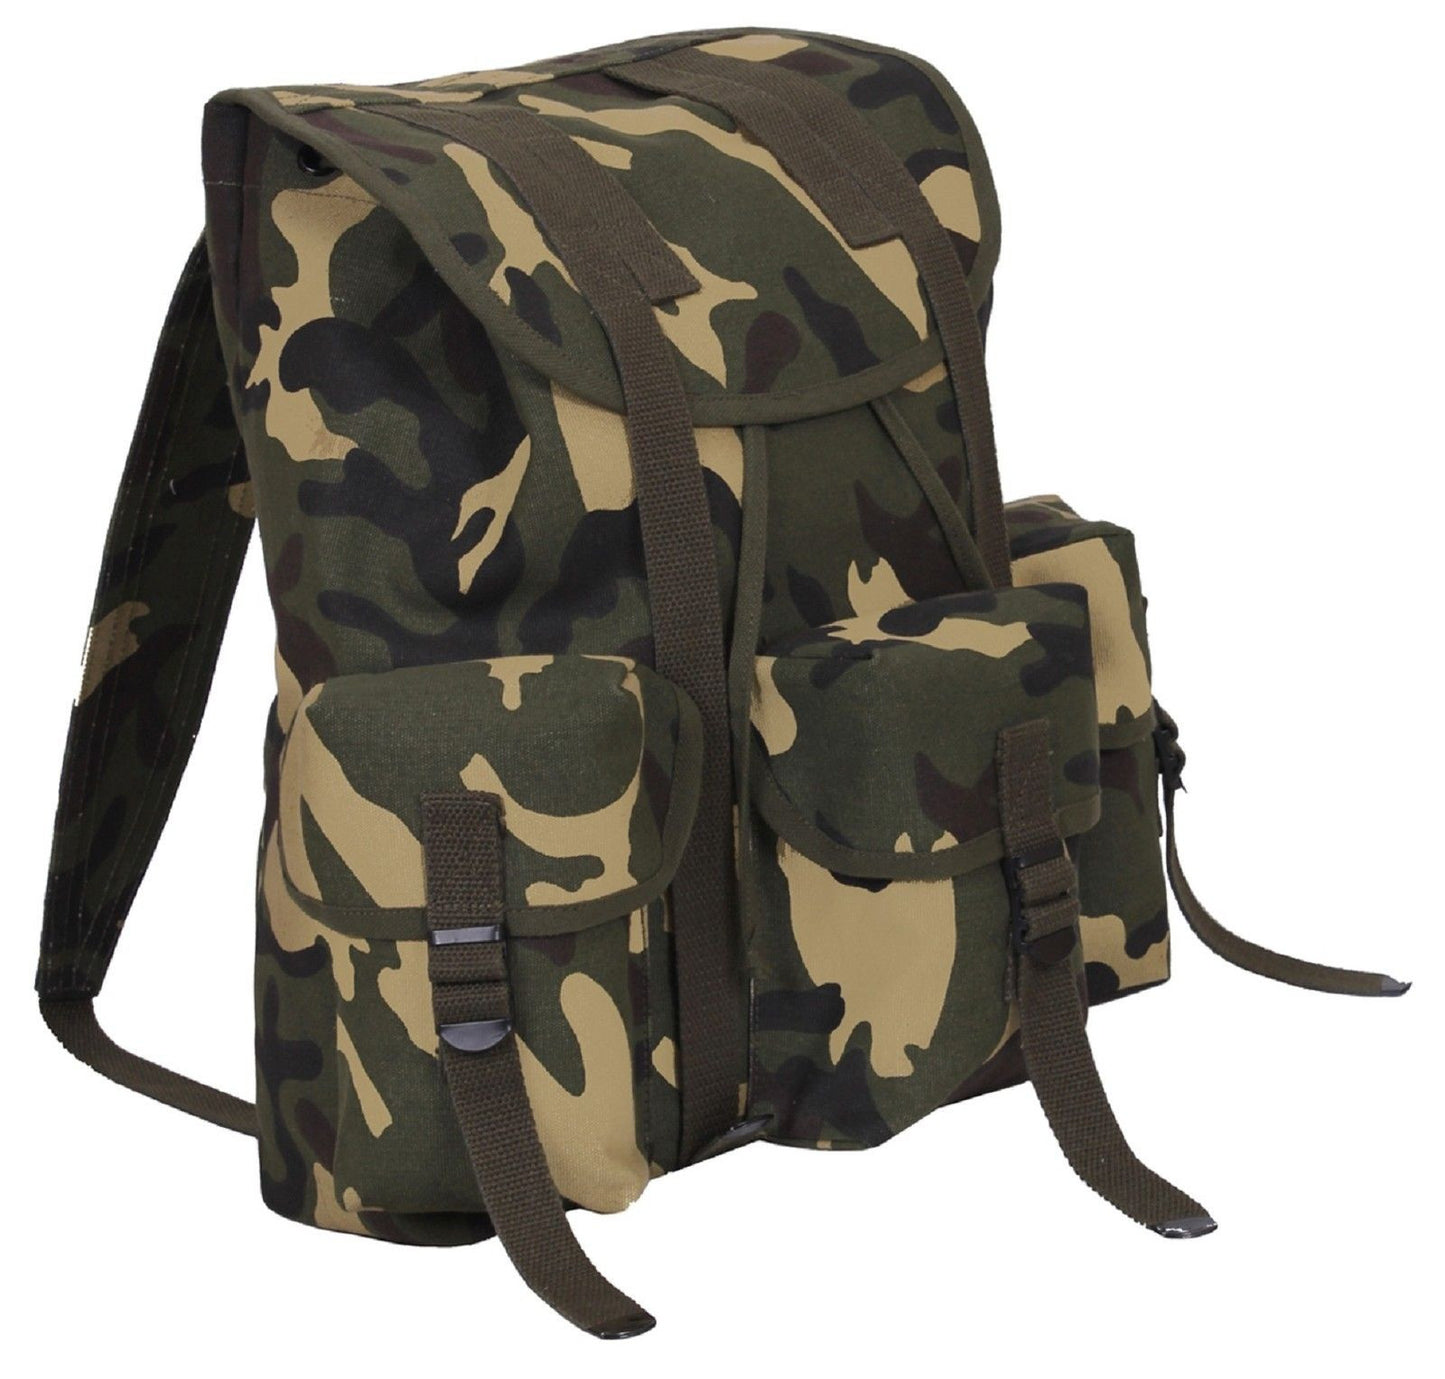 Woodland Camouflage Mini ALICE Pack Backpack 16" Canvas Camo Bag